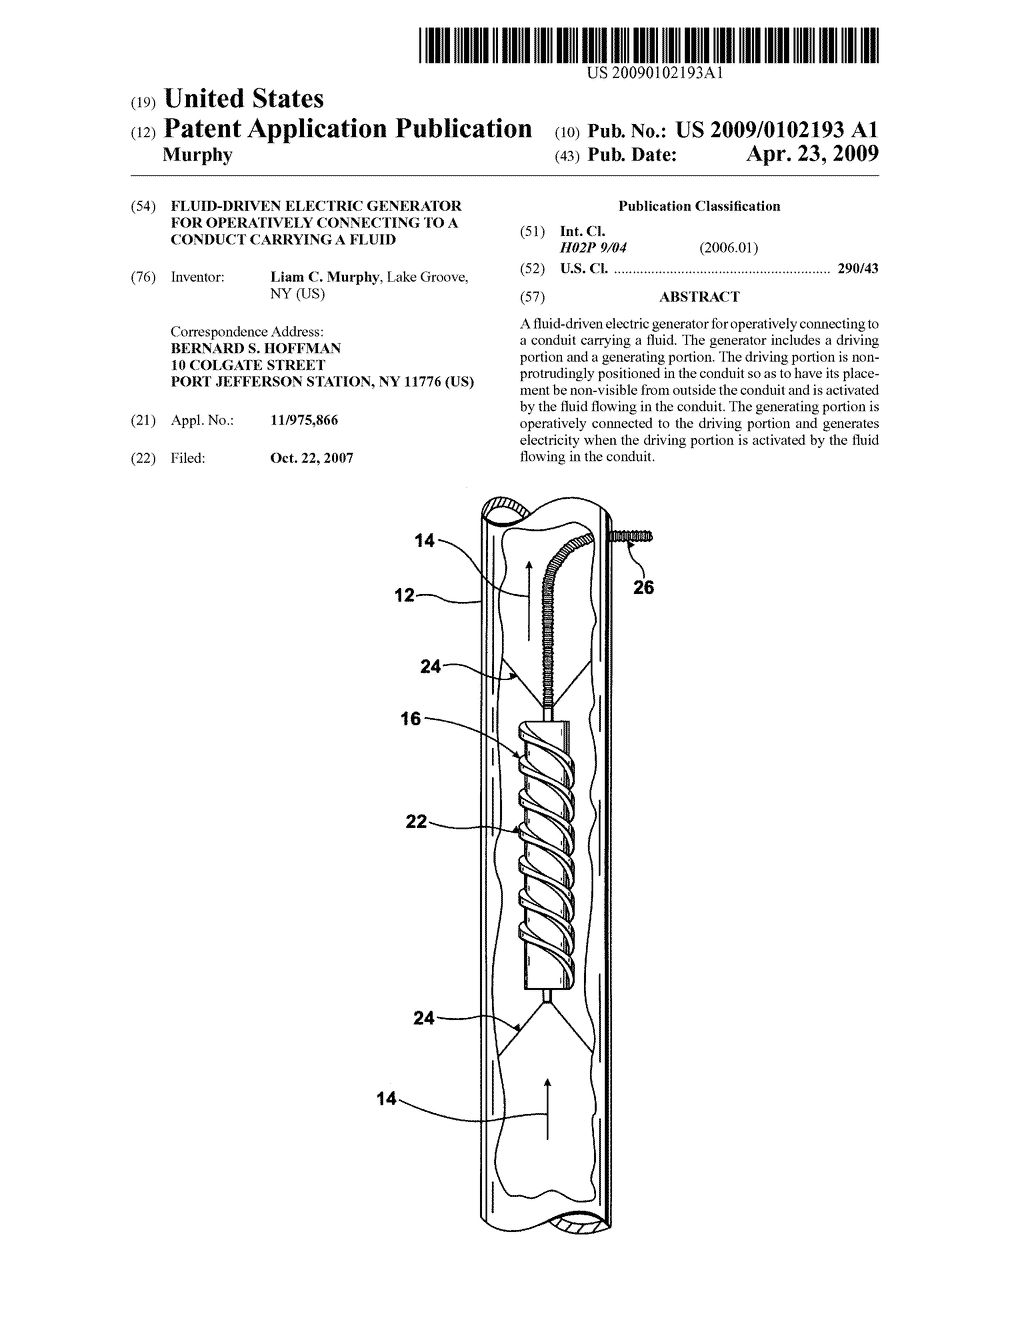 Fluid-driven electric generator for operatively connecting to a conduct carrying a fluid - diagram, schematic, and image 01